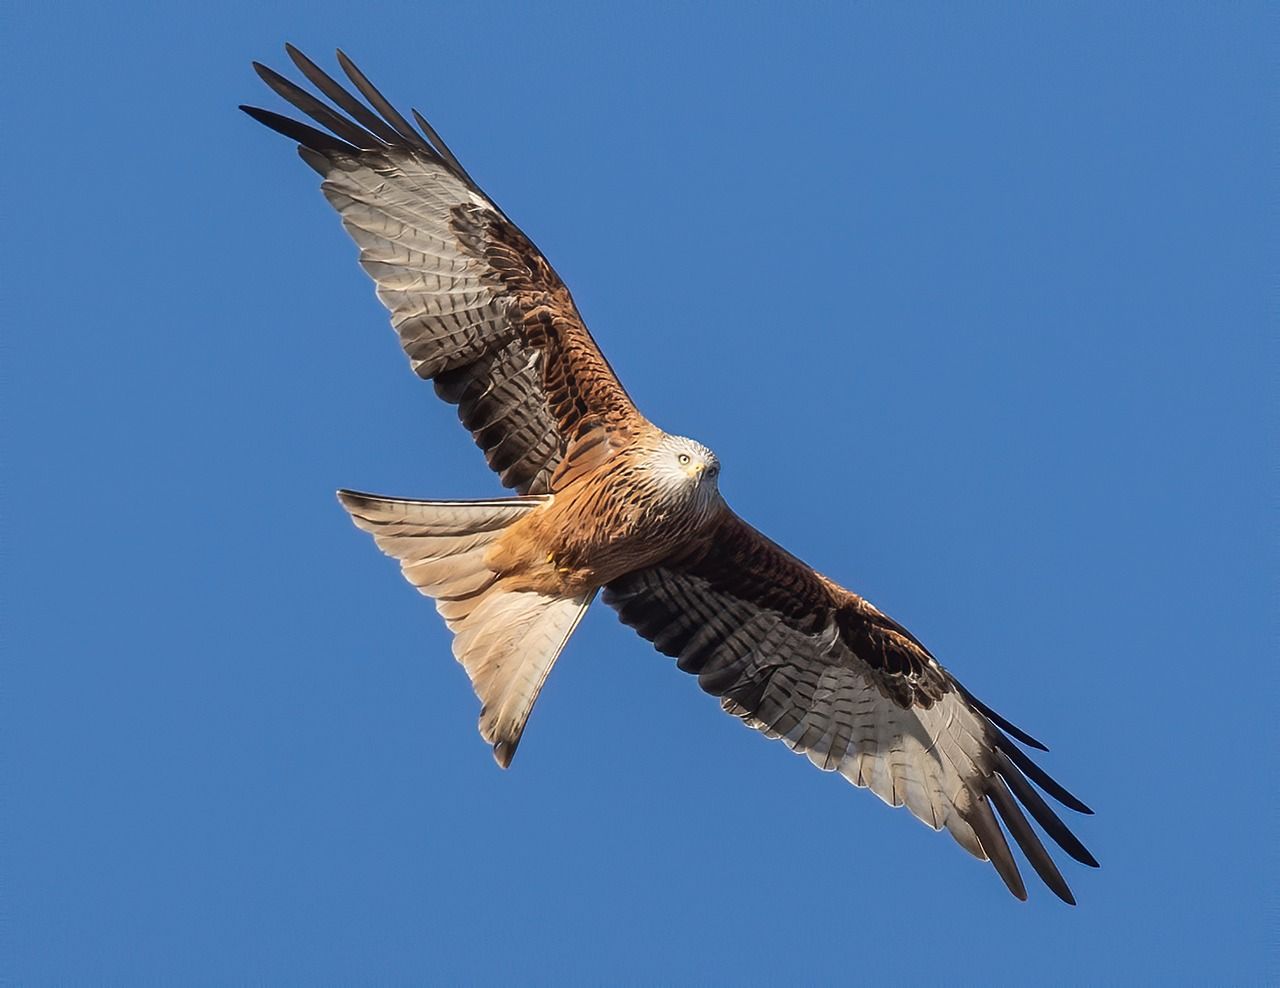 How to paint a red kite